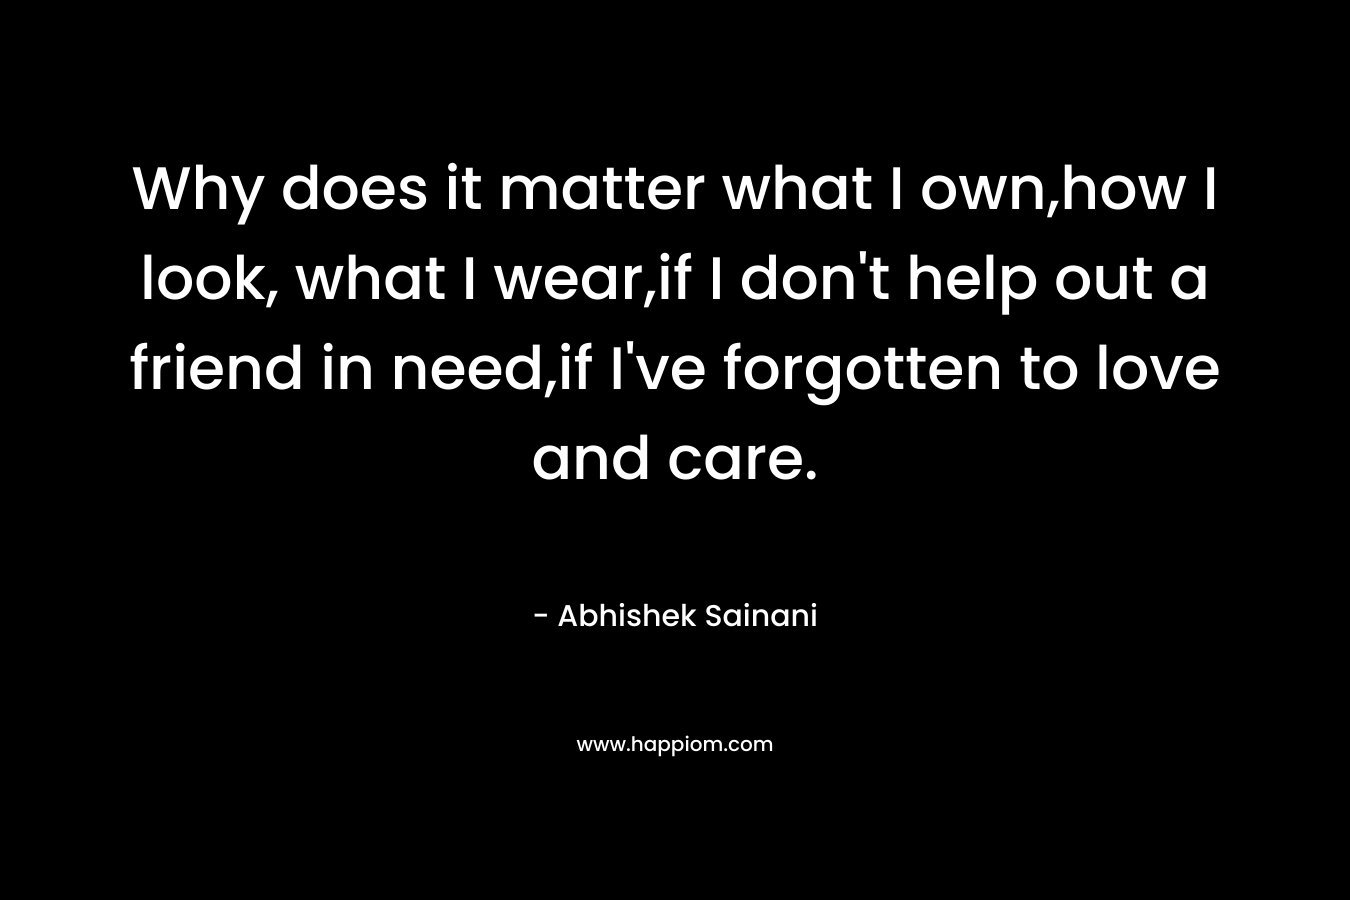 Why does it matter what I own,how I look, what I wear,if I don’t help out a friend in need,if I’ve forgotten to love and care. – Abhishek Sainani